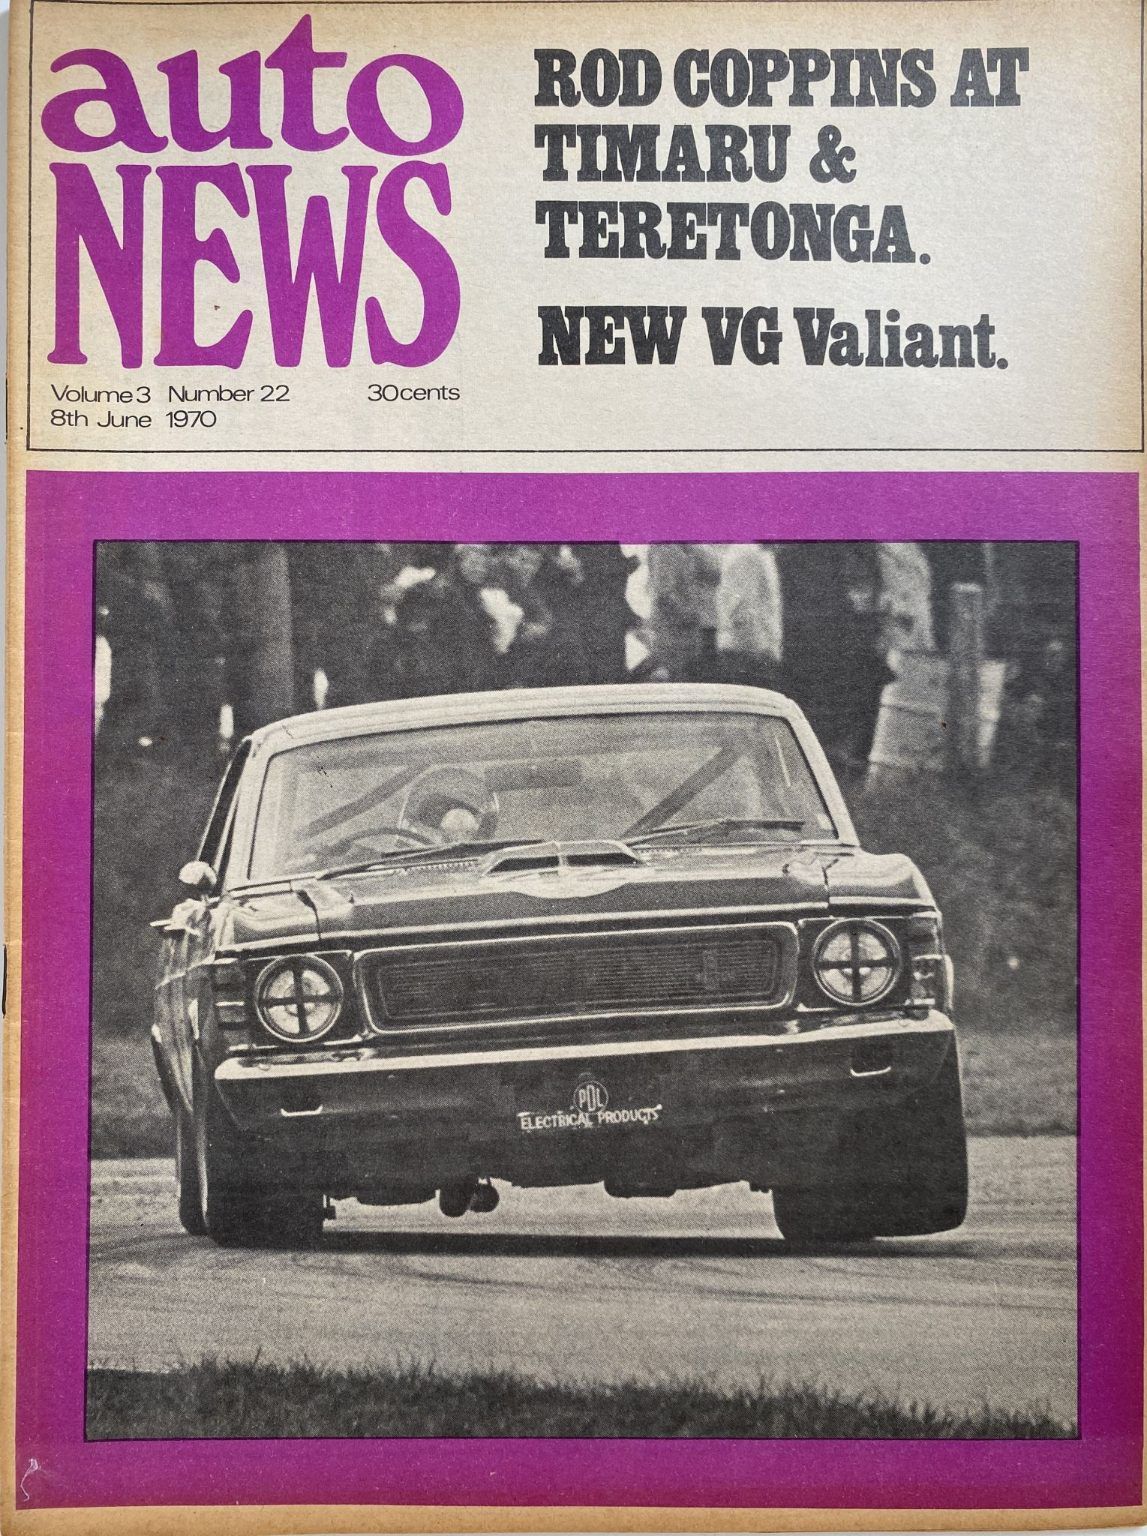 OLD MAGAZINE: Auto News - Vol. 3, Number 22, 8th June 1970